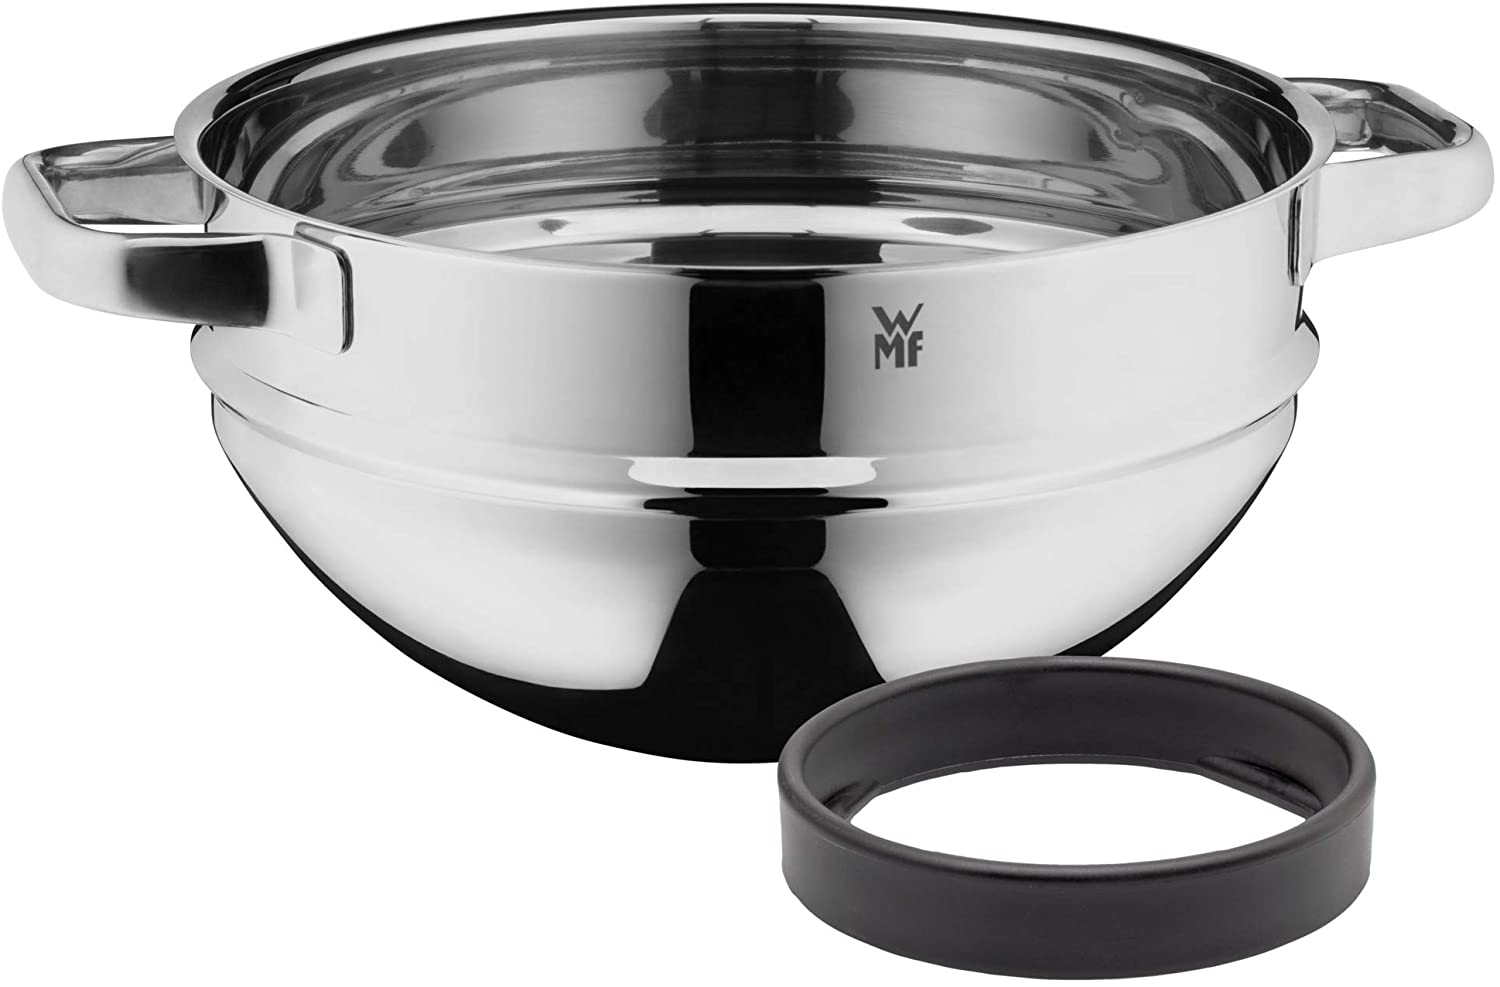 WMF Compact Cuisine mixing bowl 24 cm, water bath, Cromargan polished stainless steel, dishwasher-safe